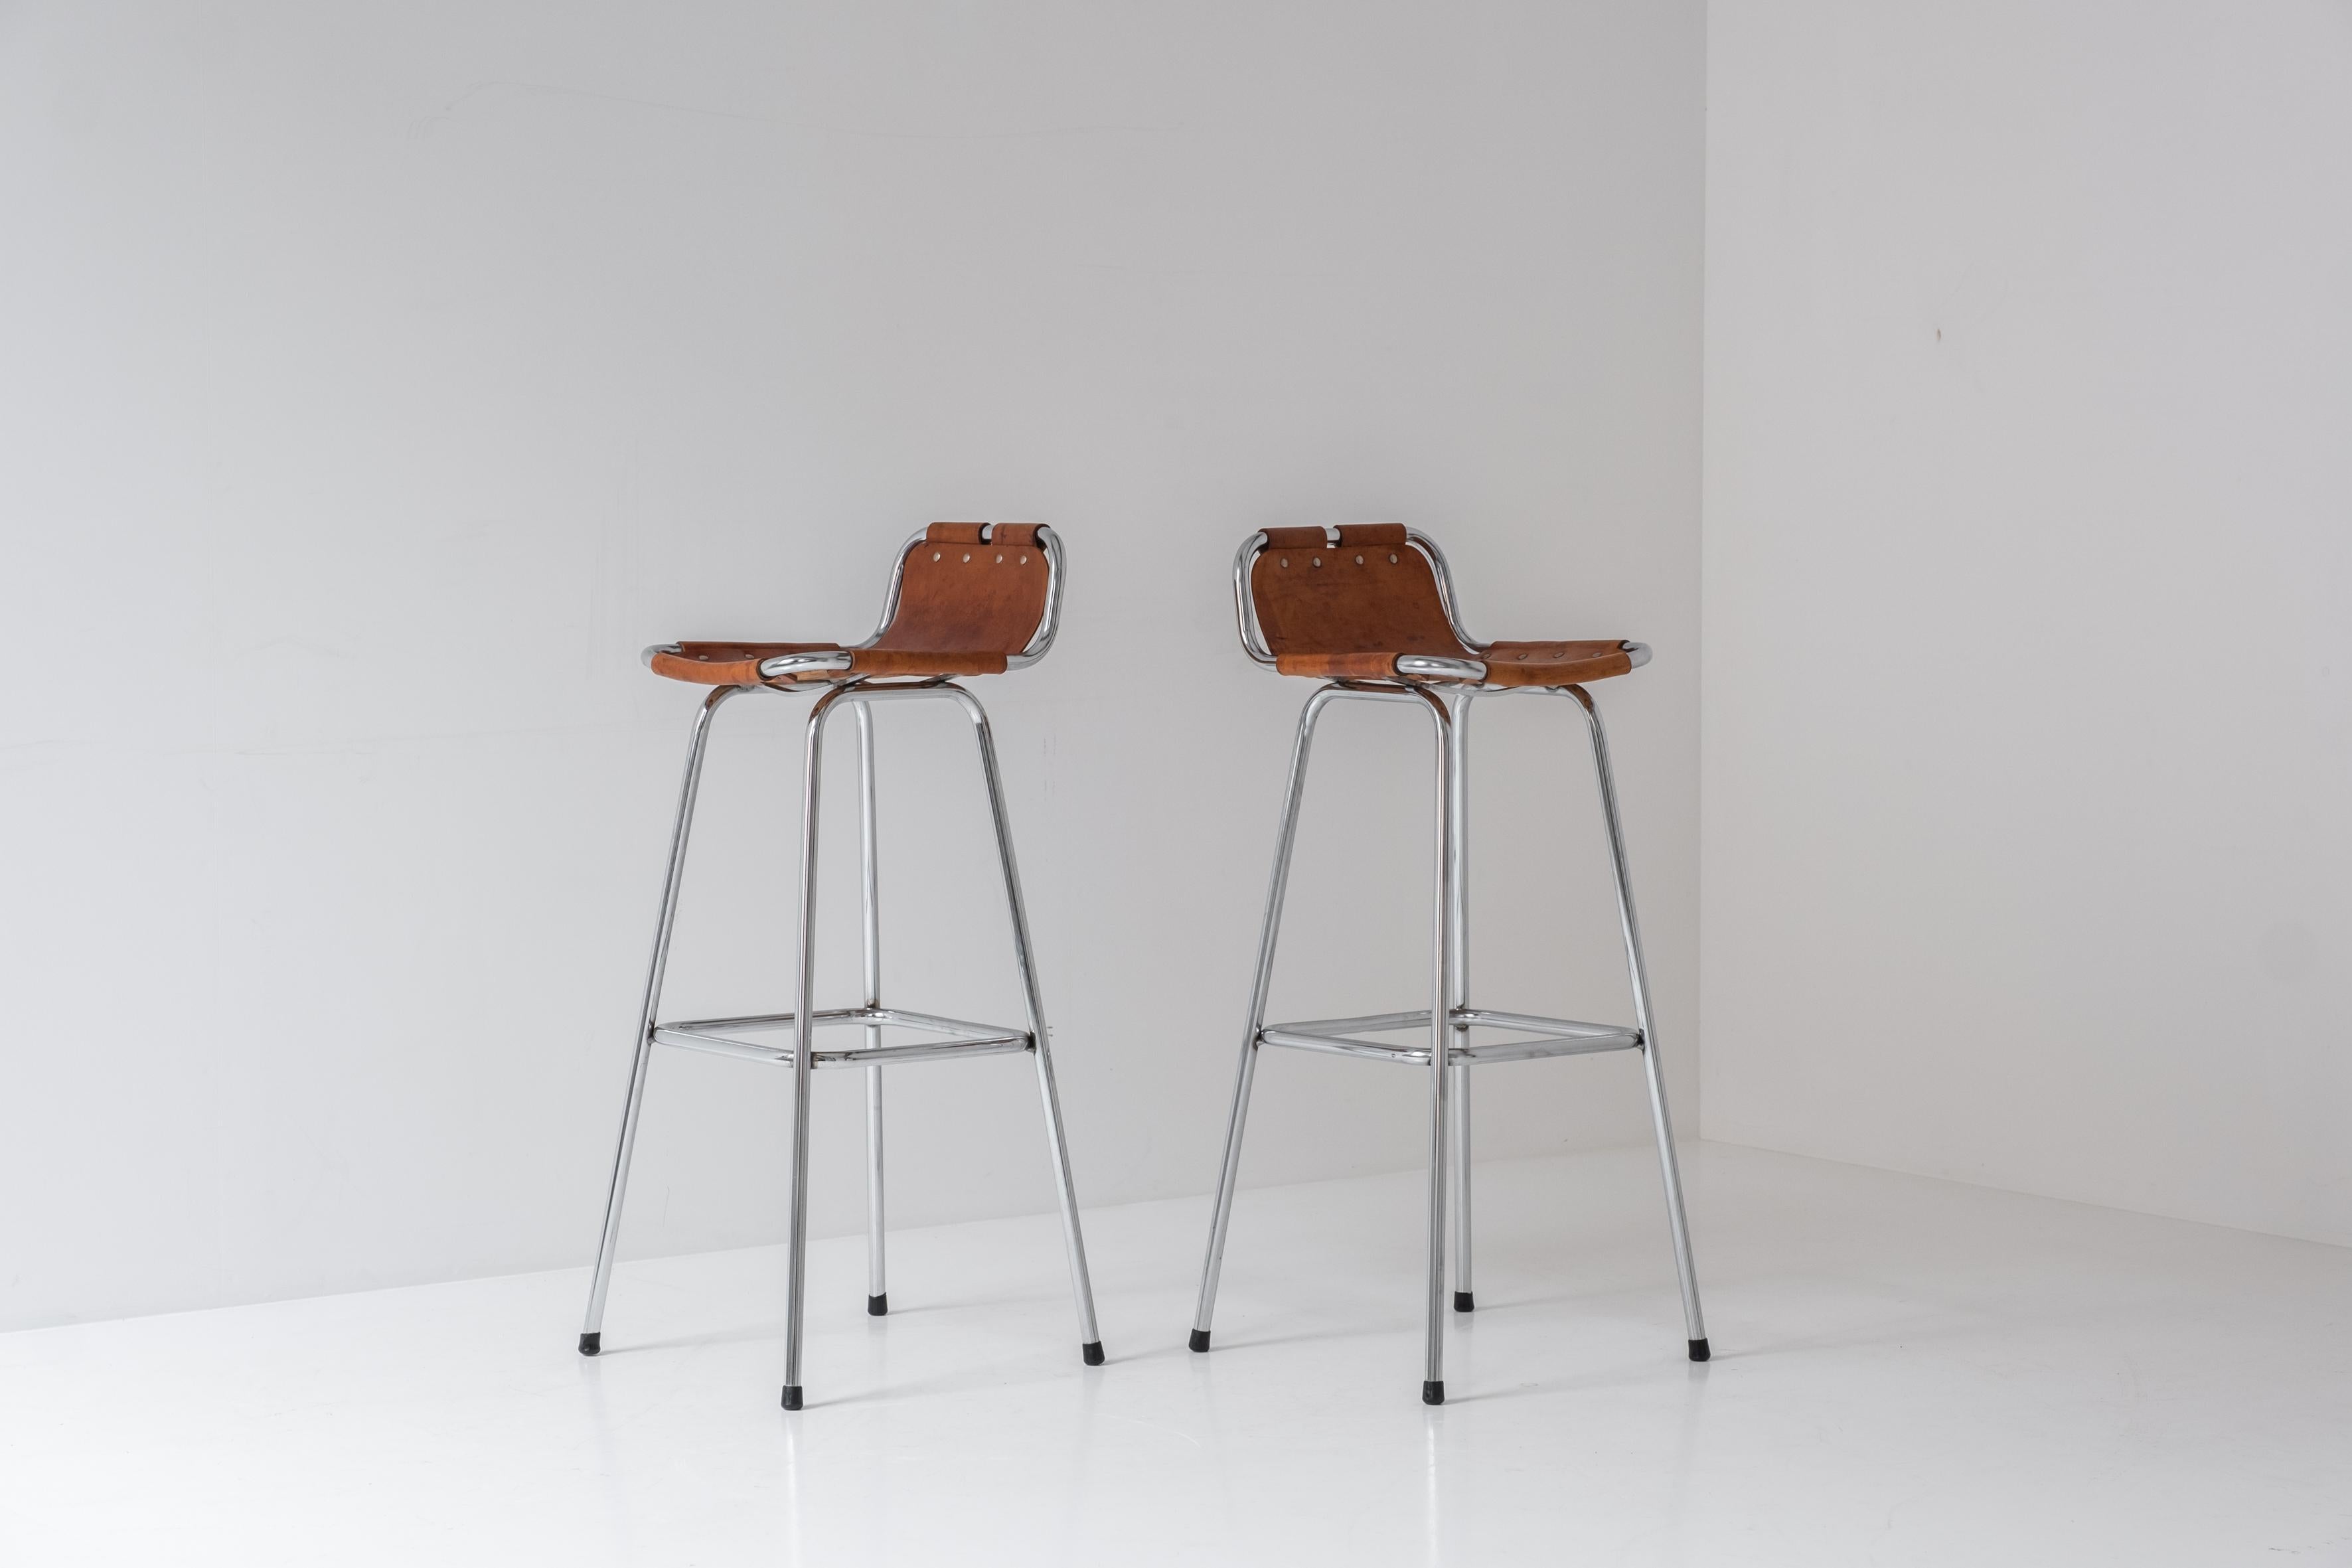 Set of two bar stools selected by Charlotte Perriand for the famous Ski Resort Les Arcs, France 1960’s. These stools features chrome frames and cognac leather seats. Nice overall patina !